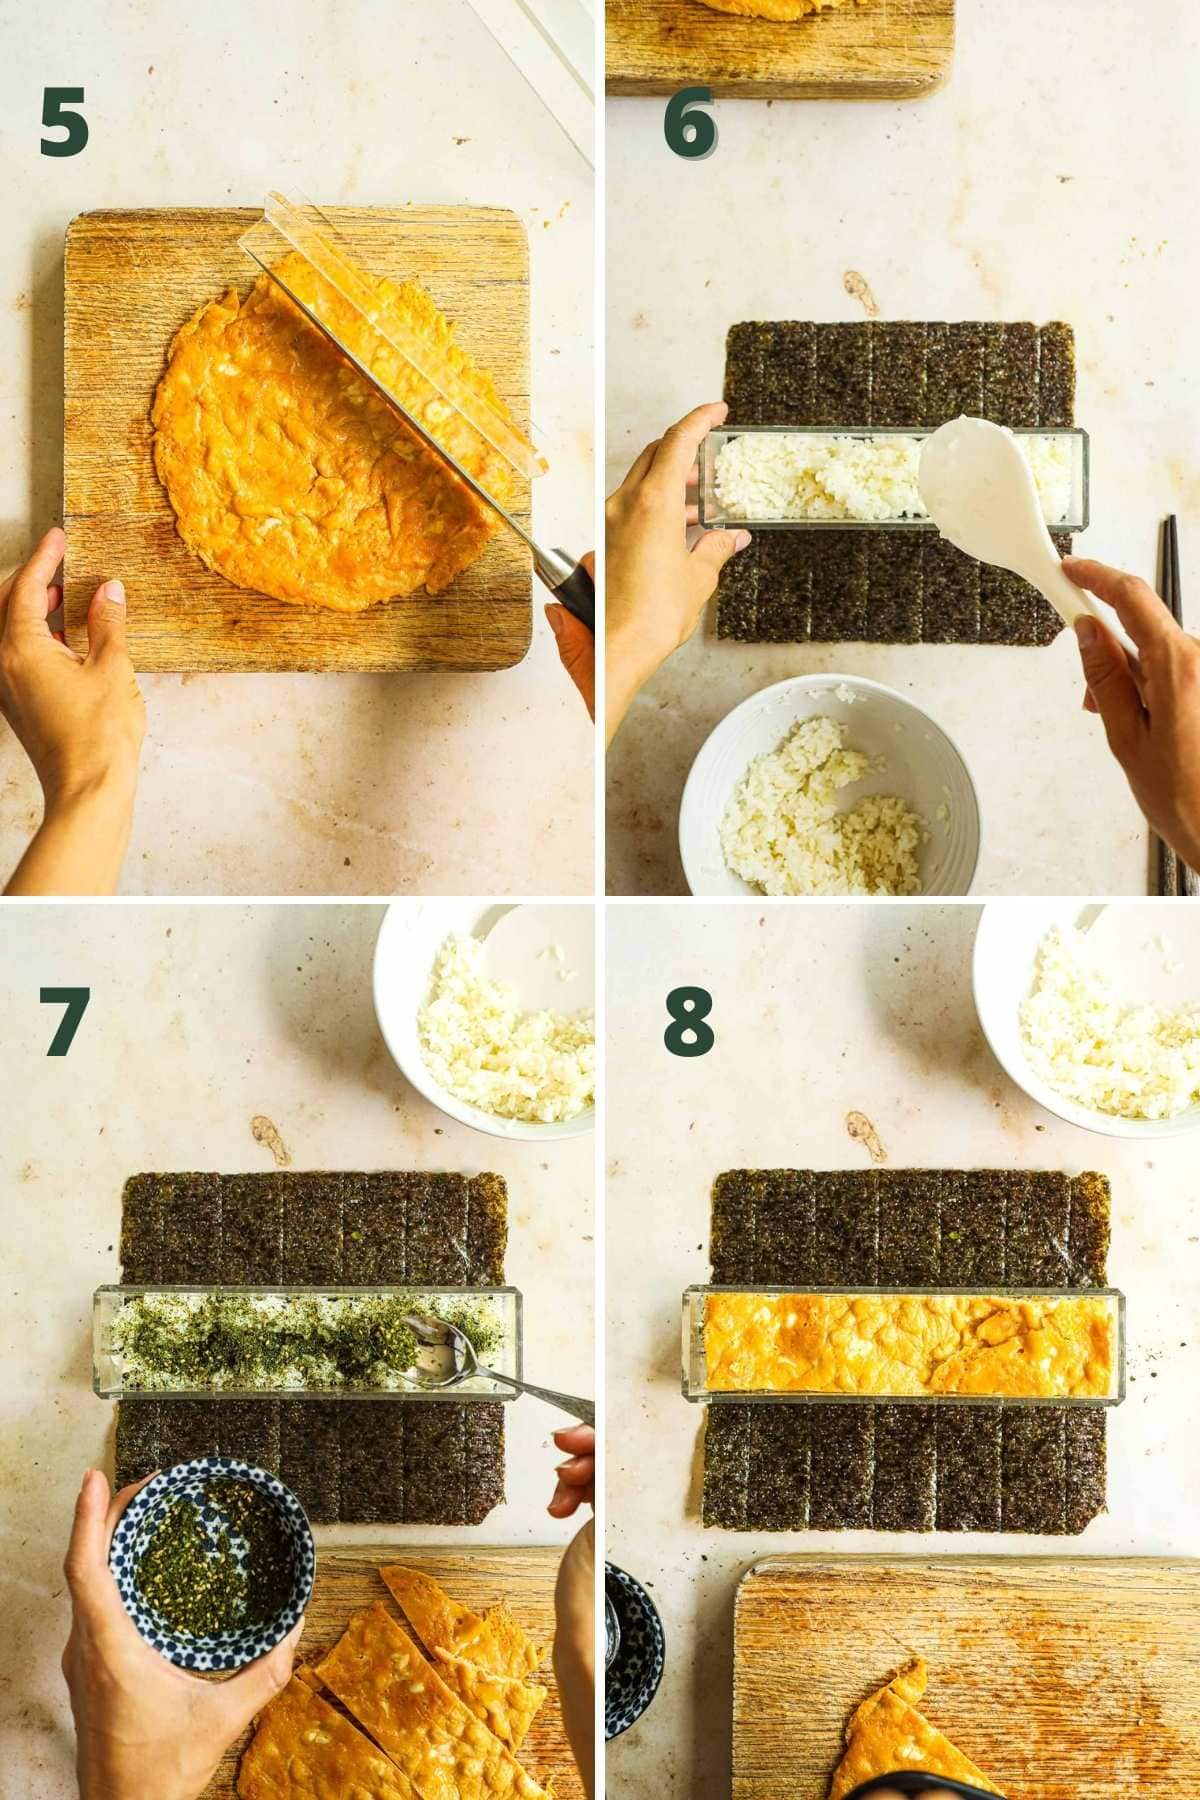 Steps to make spam musubi with egg, including cutting the egg, adding the rice to the musubi mold, adding furikake on top, and adding egg to the mold.